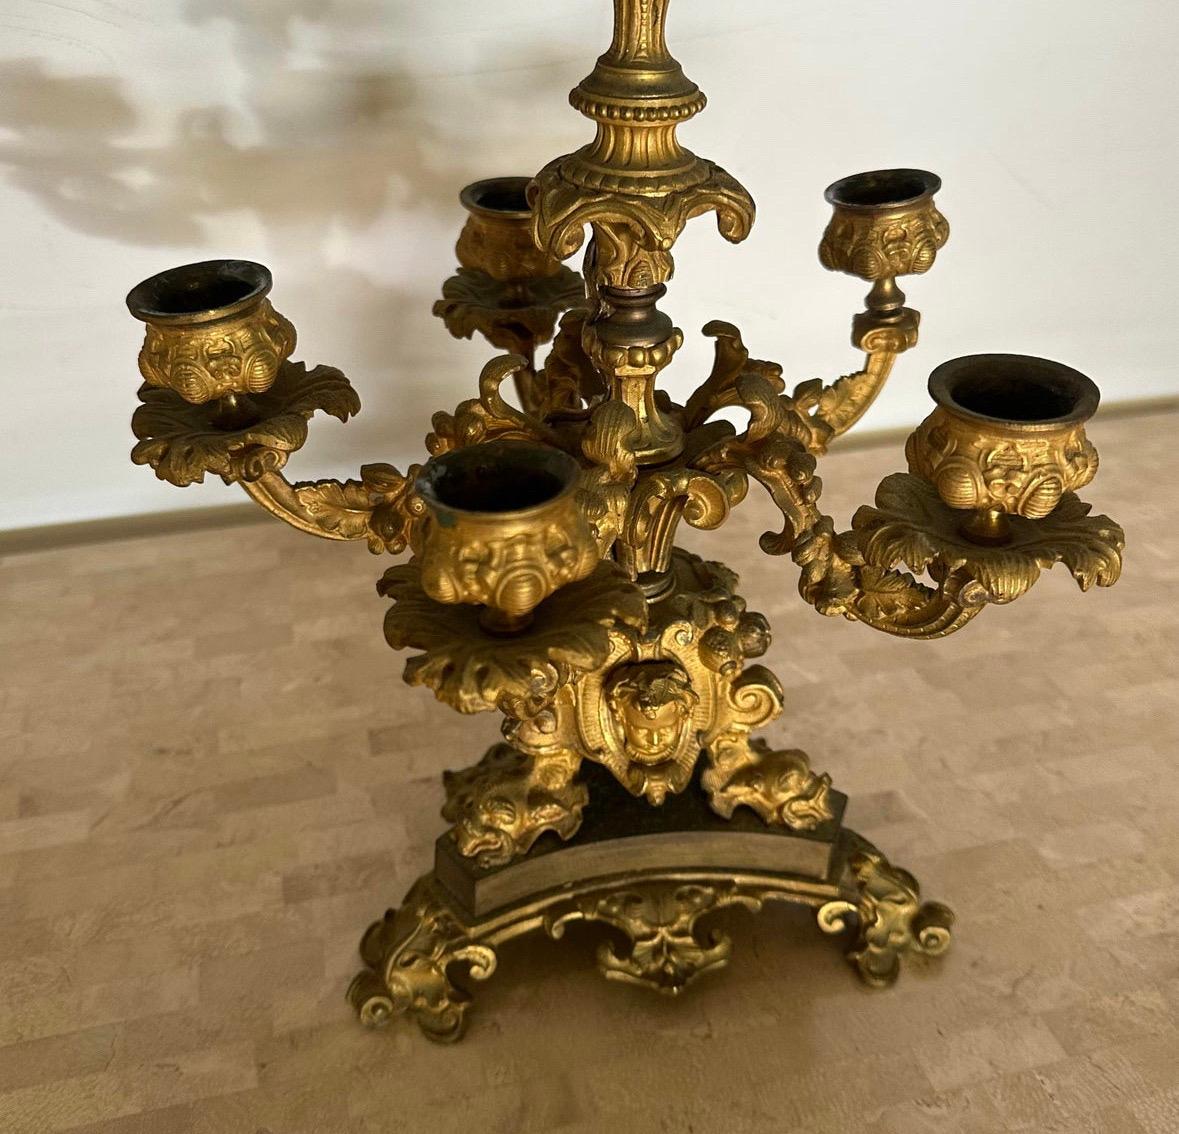 19th Century French Ormolu Candelabra Lamp With Tole Shade For Sale 1